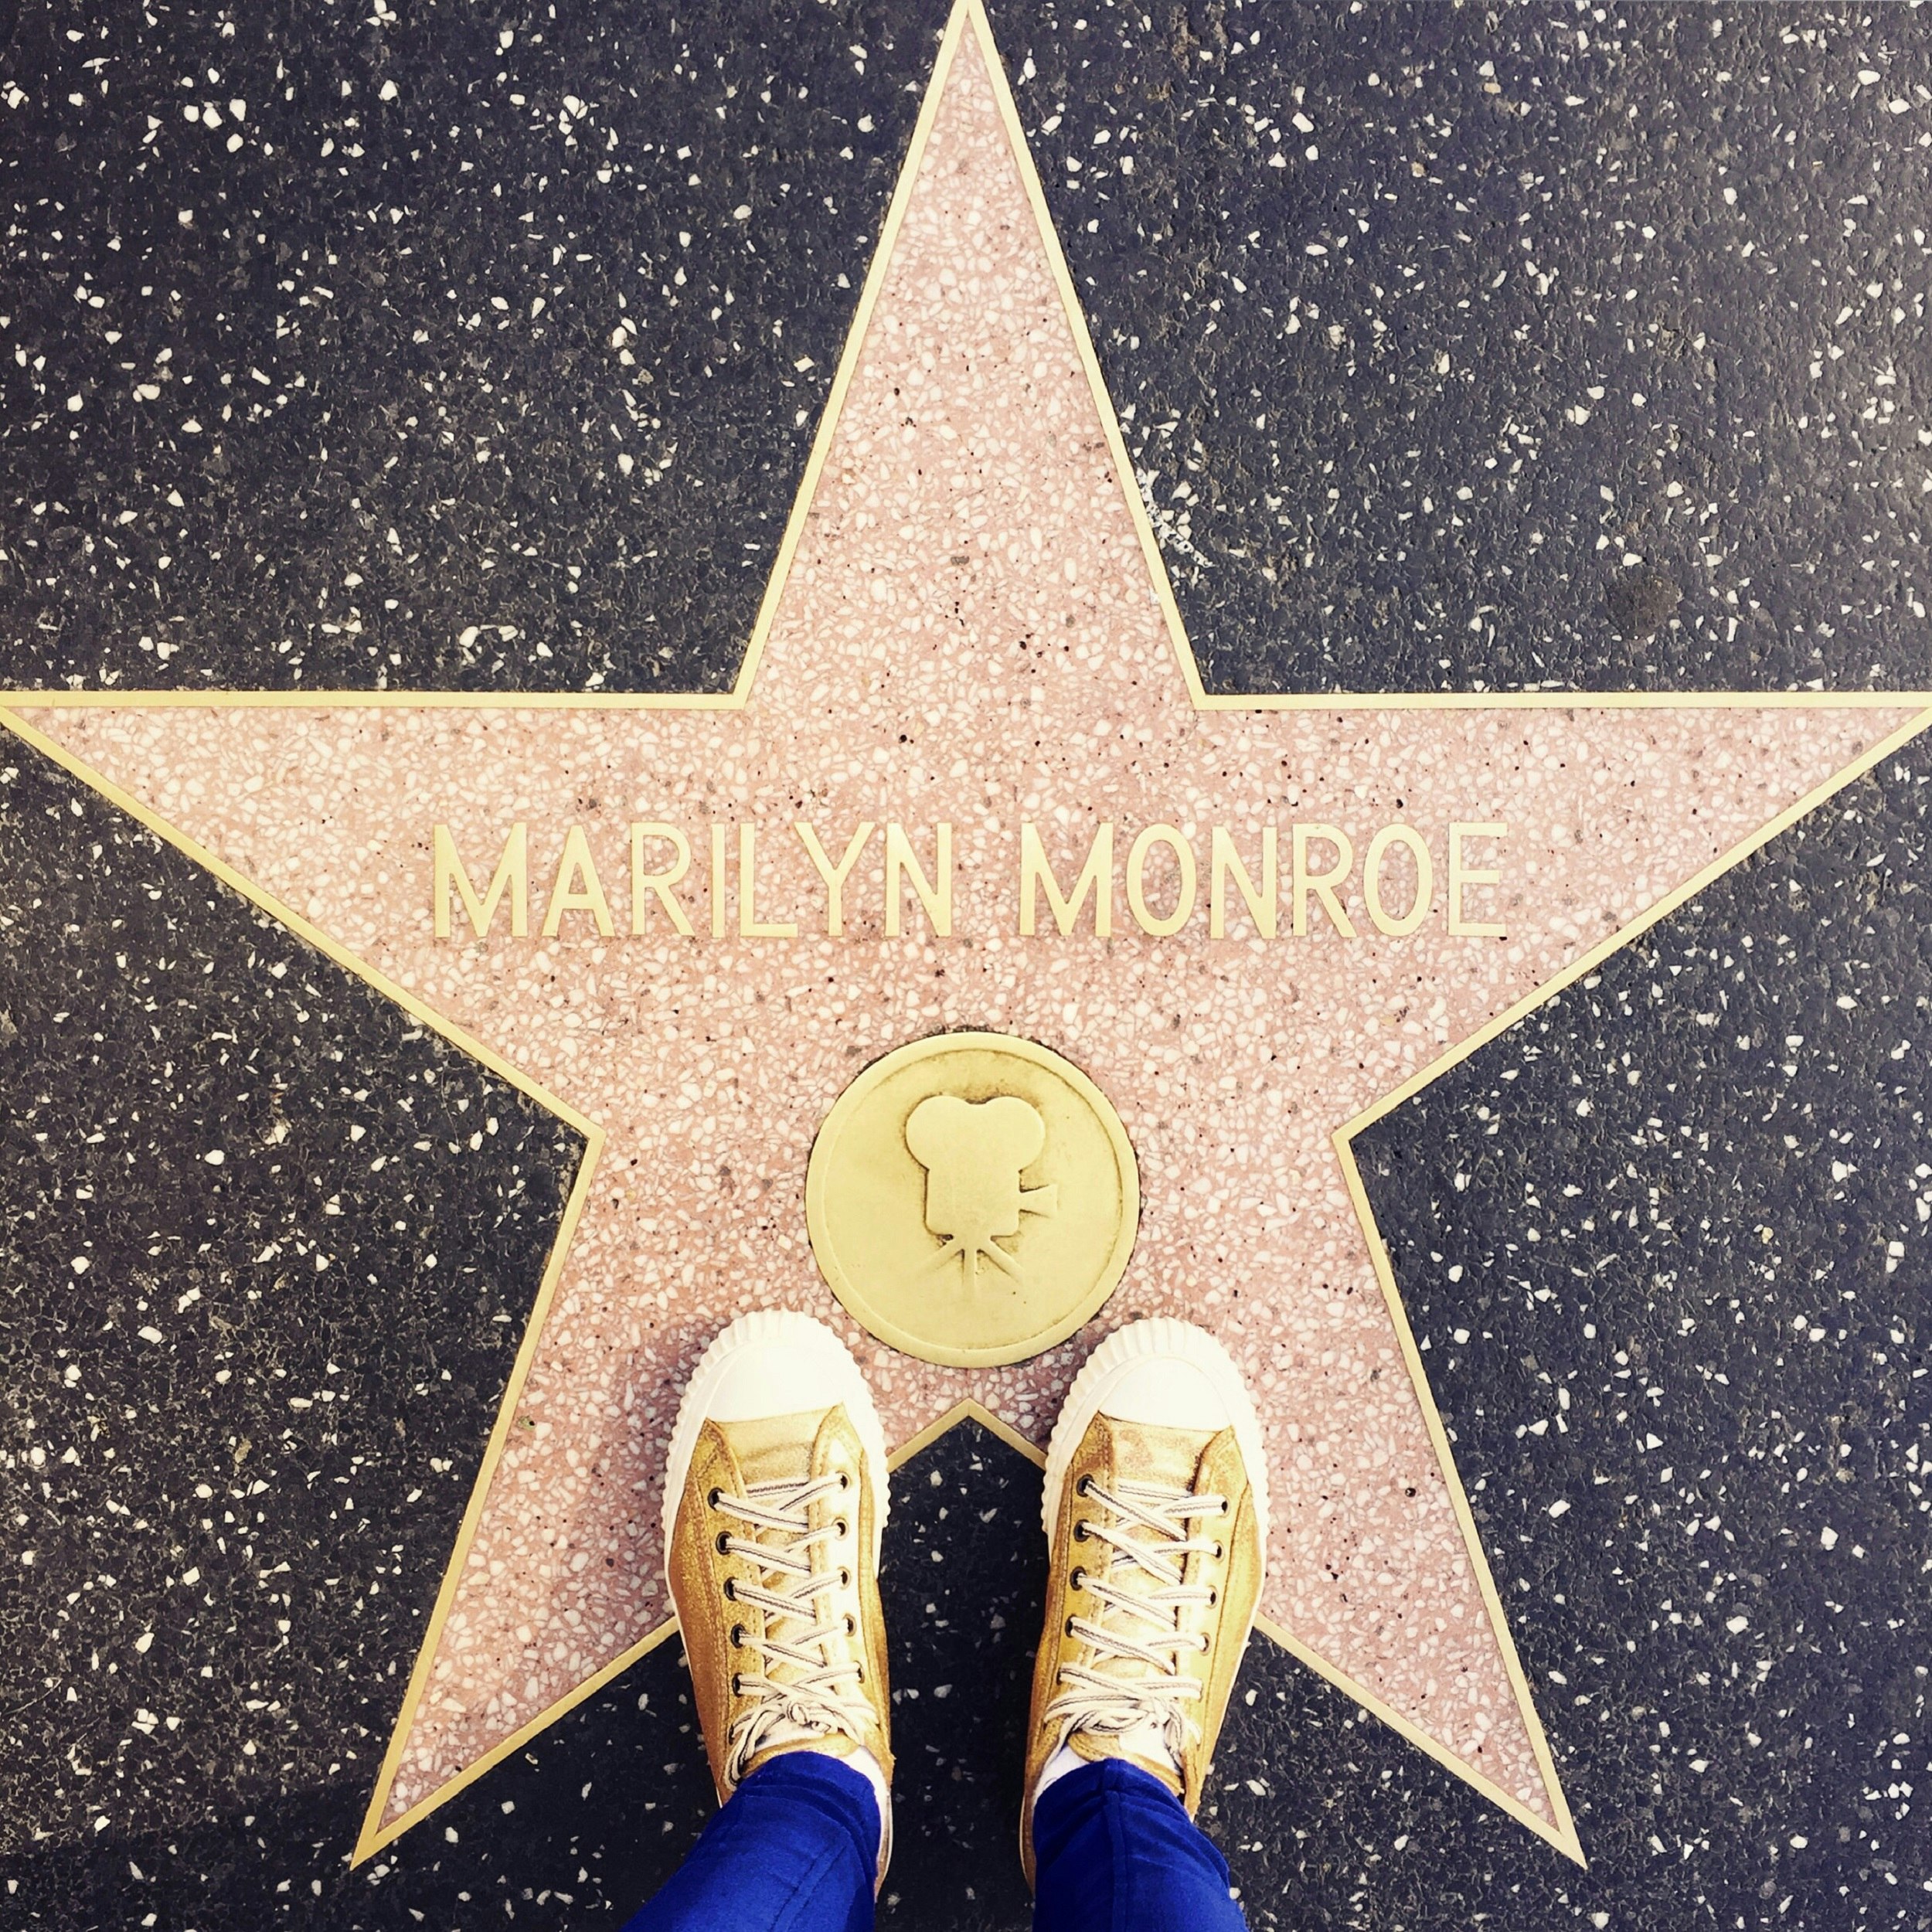 A shot from above: a person's sneakers are visible standing on the edge of the Marilyn Monroe star on the Hollywood Walk of Fame.